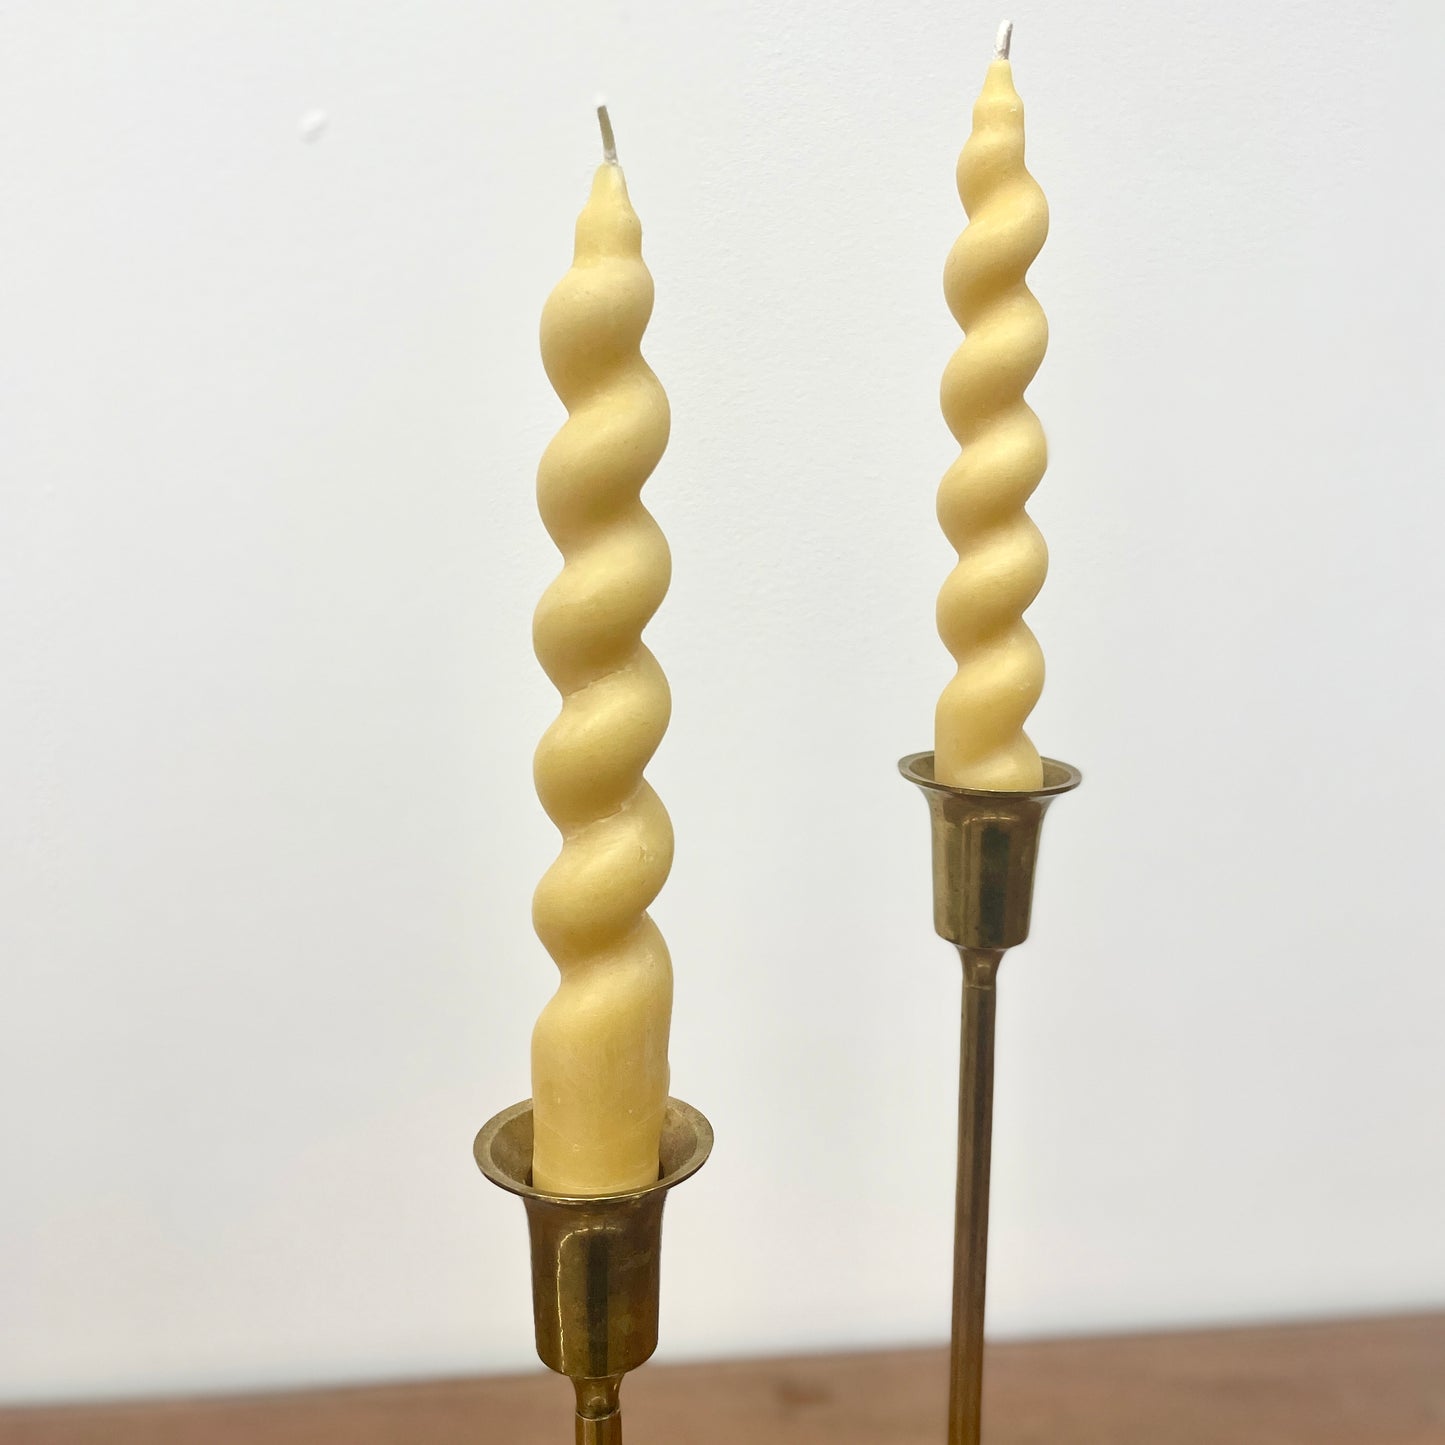 NEW Beeswax Wavy Curvy Taper Candles, Pair of 2 // Tapers, Twist, Tapered Candles, Beeswax Candles, 8" Tapers